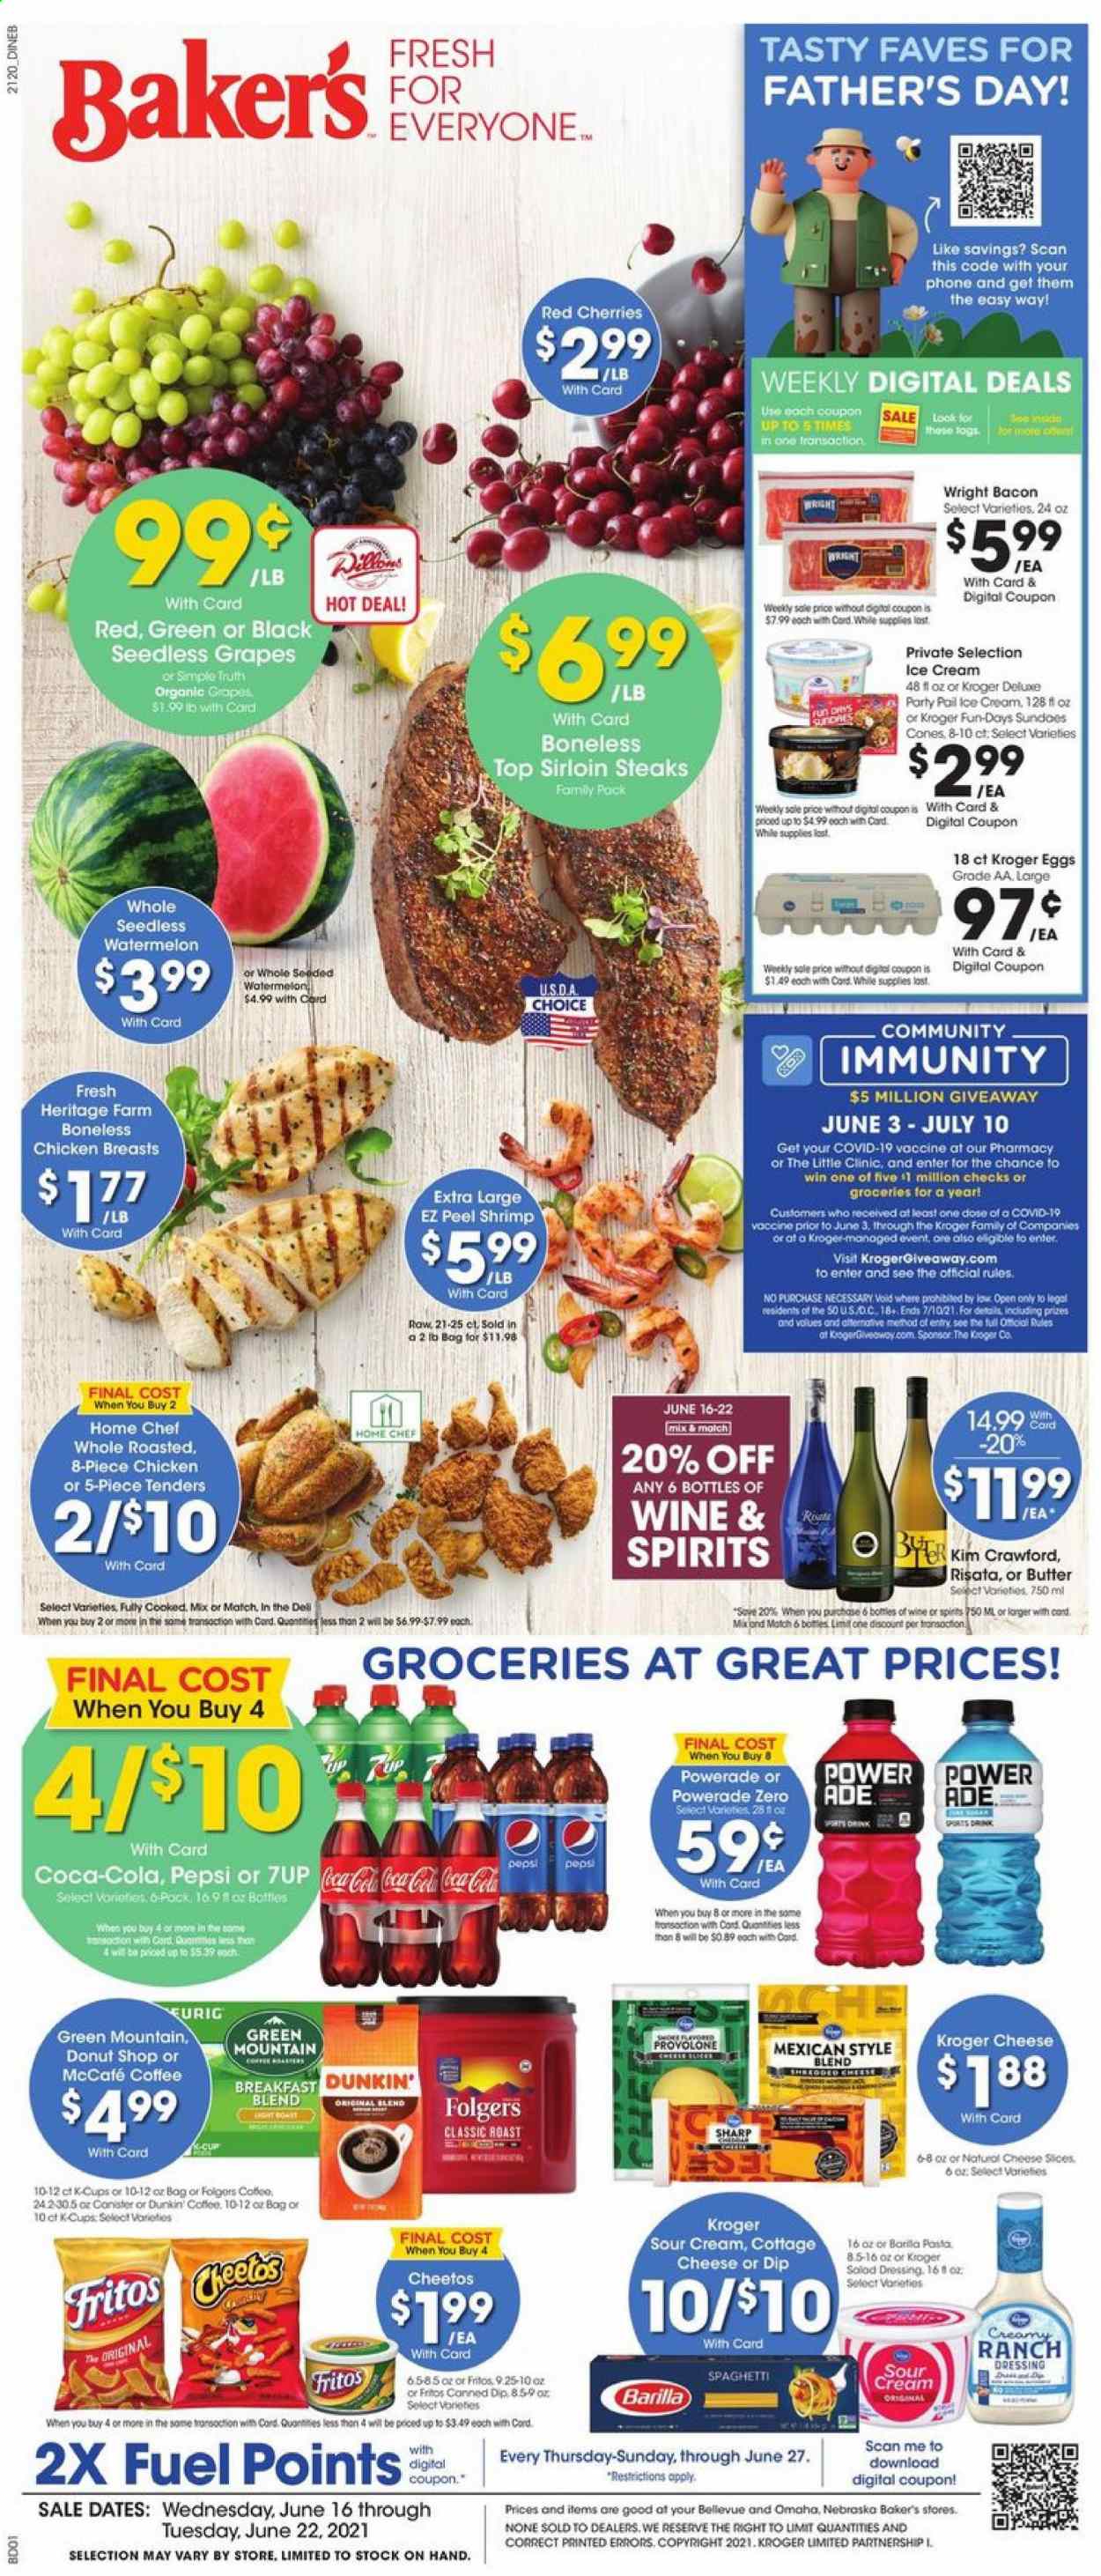 thumbnail - Baker's Flyer - 06/16/2021 - 06/22/2021 - Sales products - seedless grapes, grapes, watermelon, cherries, shrimps, spaghetti, pasta, Barilla, bacon, cottage cheese, Provolone, eggs, butter, sour cream, dip, ice cream, Fritos, Cheetos, dressing, Coca-Cola, Powerade, Pepsi, 7UP, coffee, Folgers, McCafe, Green Mountain, wine, chicken breasts, steak, sirloin steak, Sharp, Bakers. Page 1.